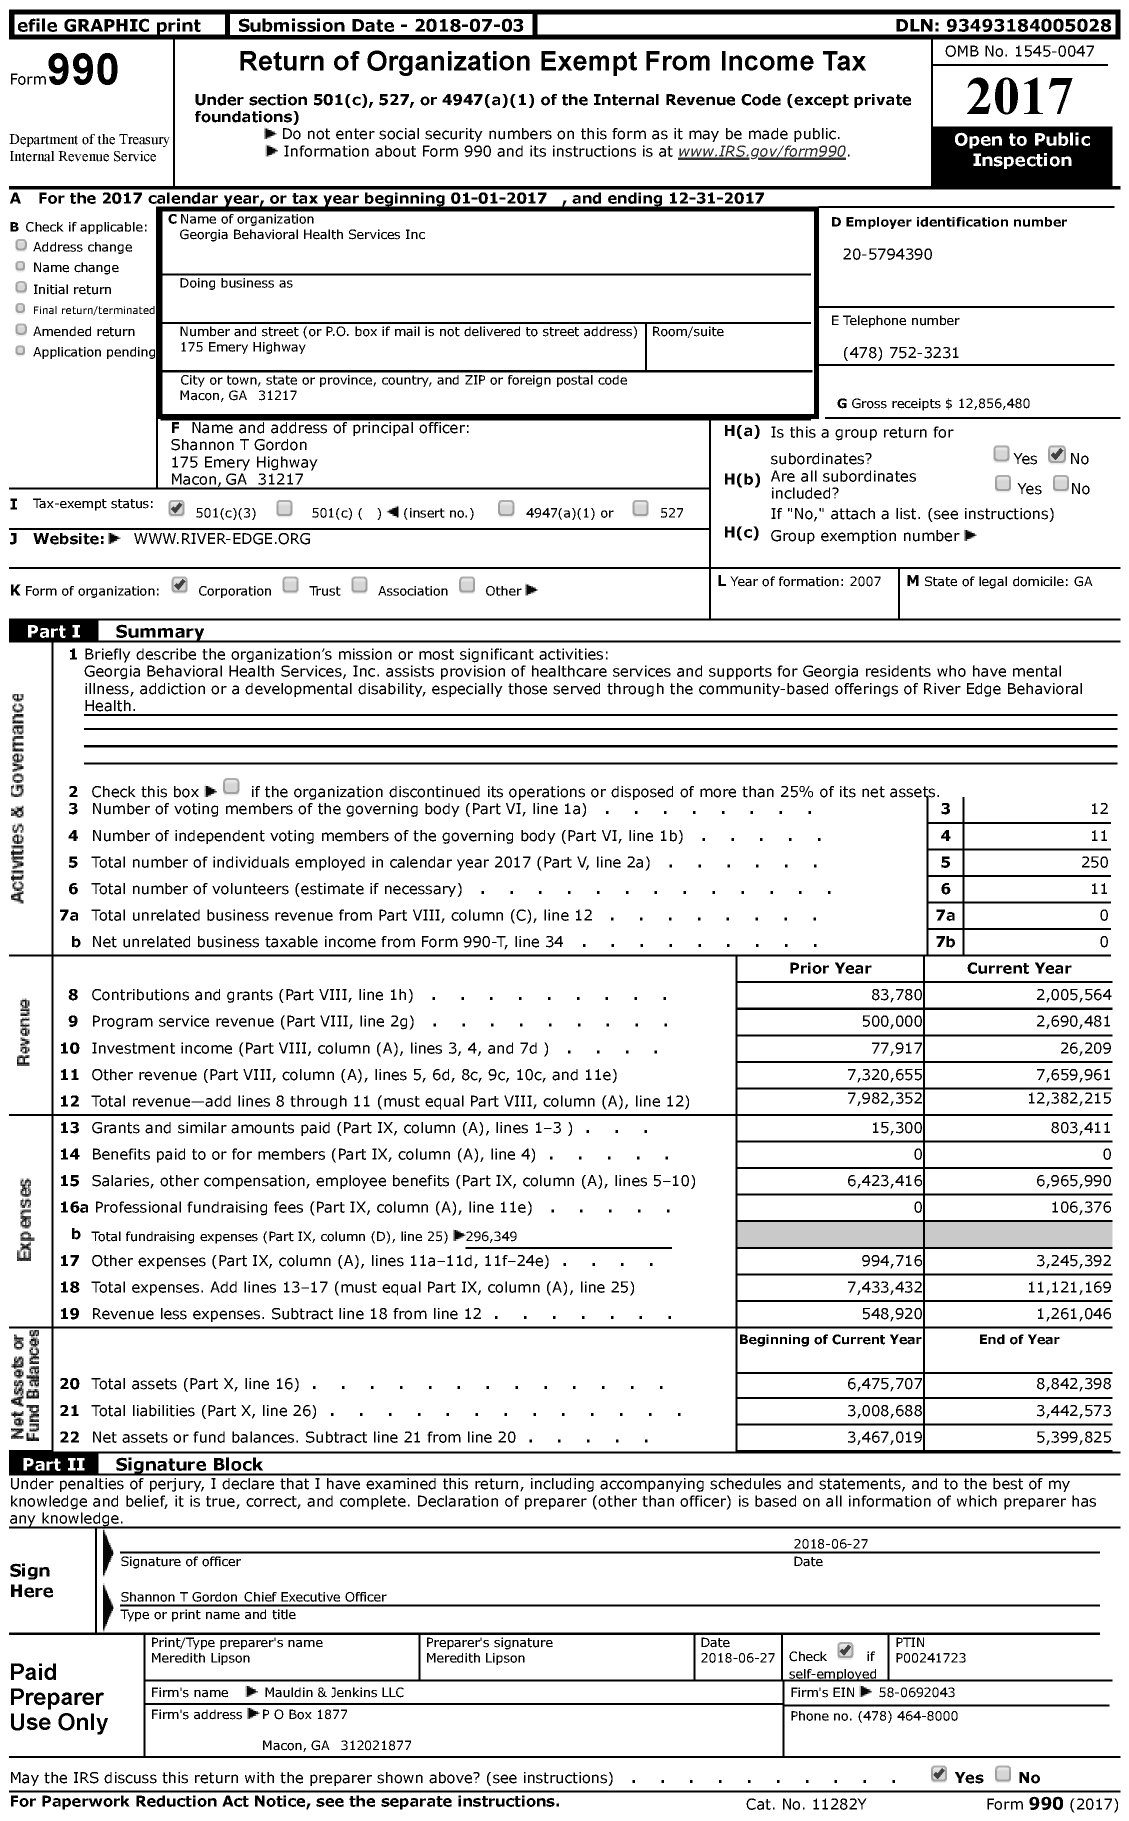 Image of first page of 2017 Form 990 for River Edge Foundation